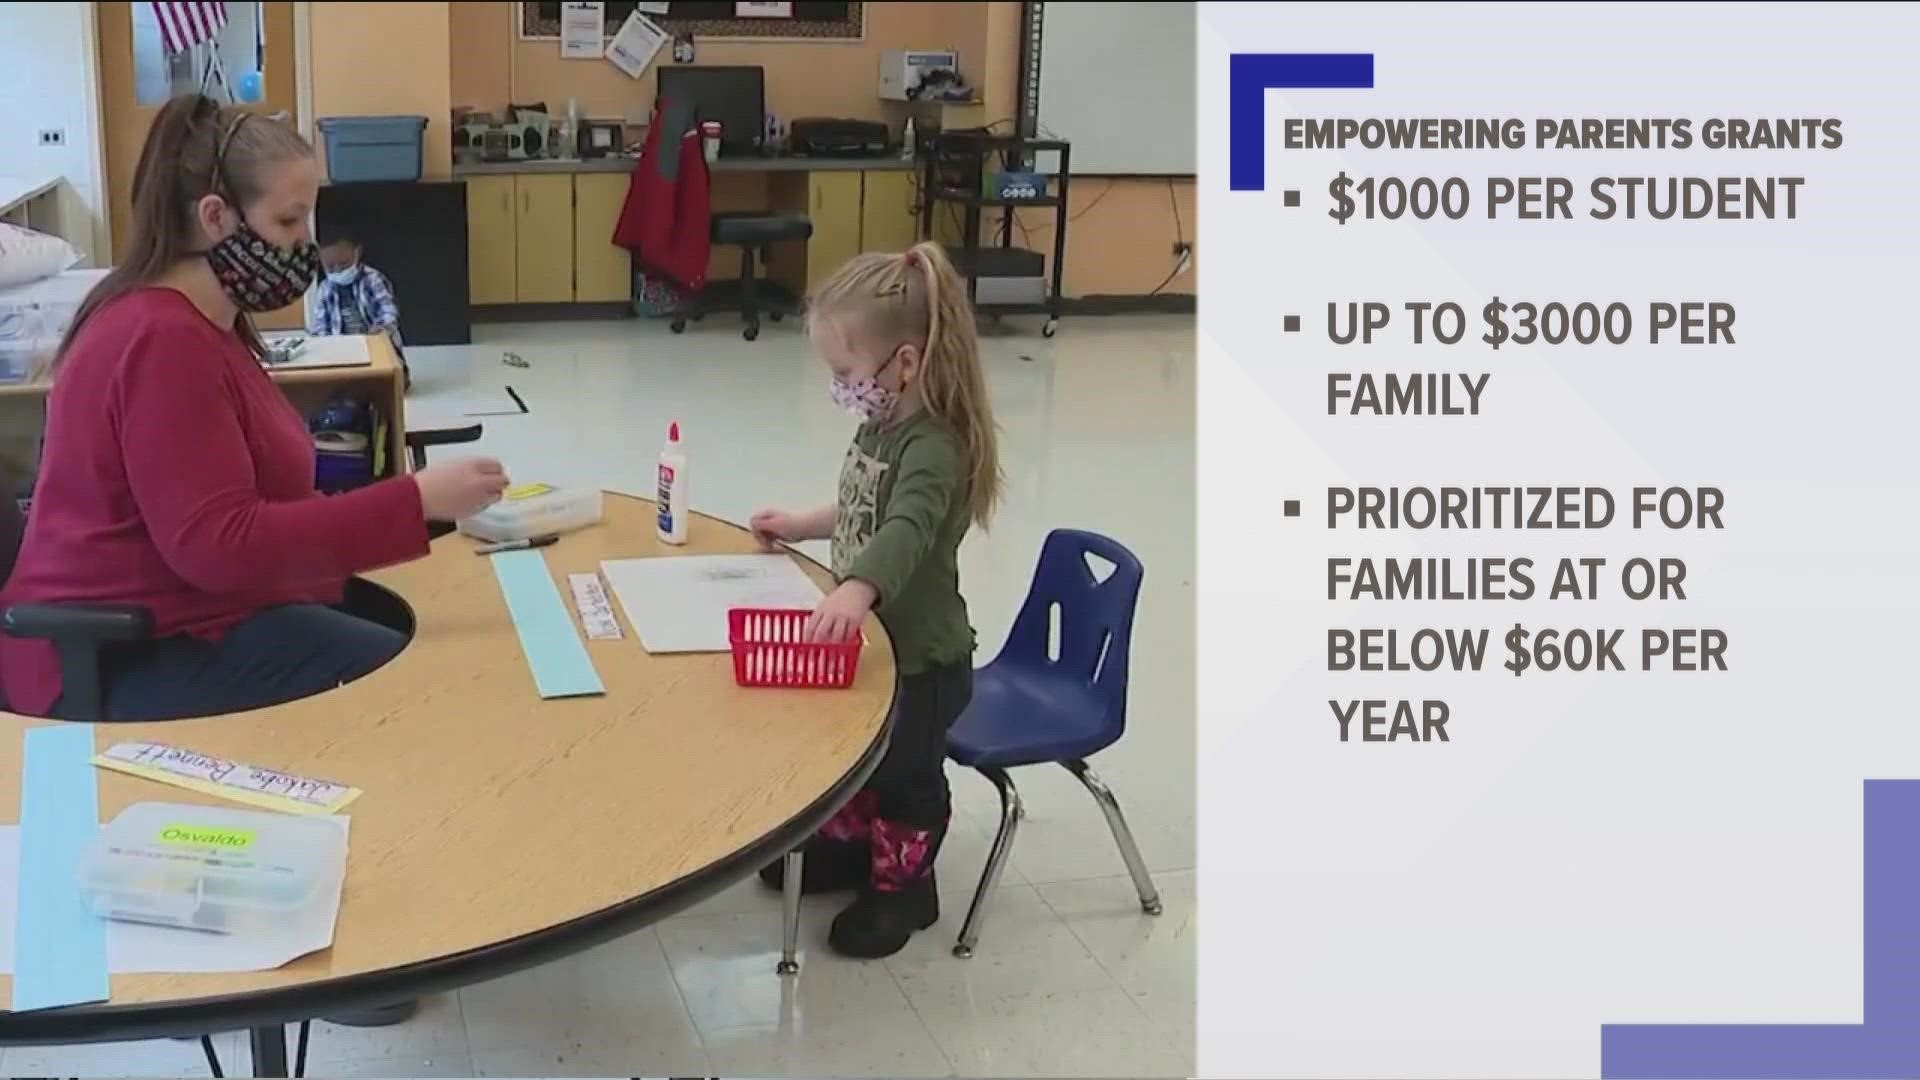 Eligible parents or guardians will be able to use the funds to purchase education-related resources and services from computer hardware to tutoring services.